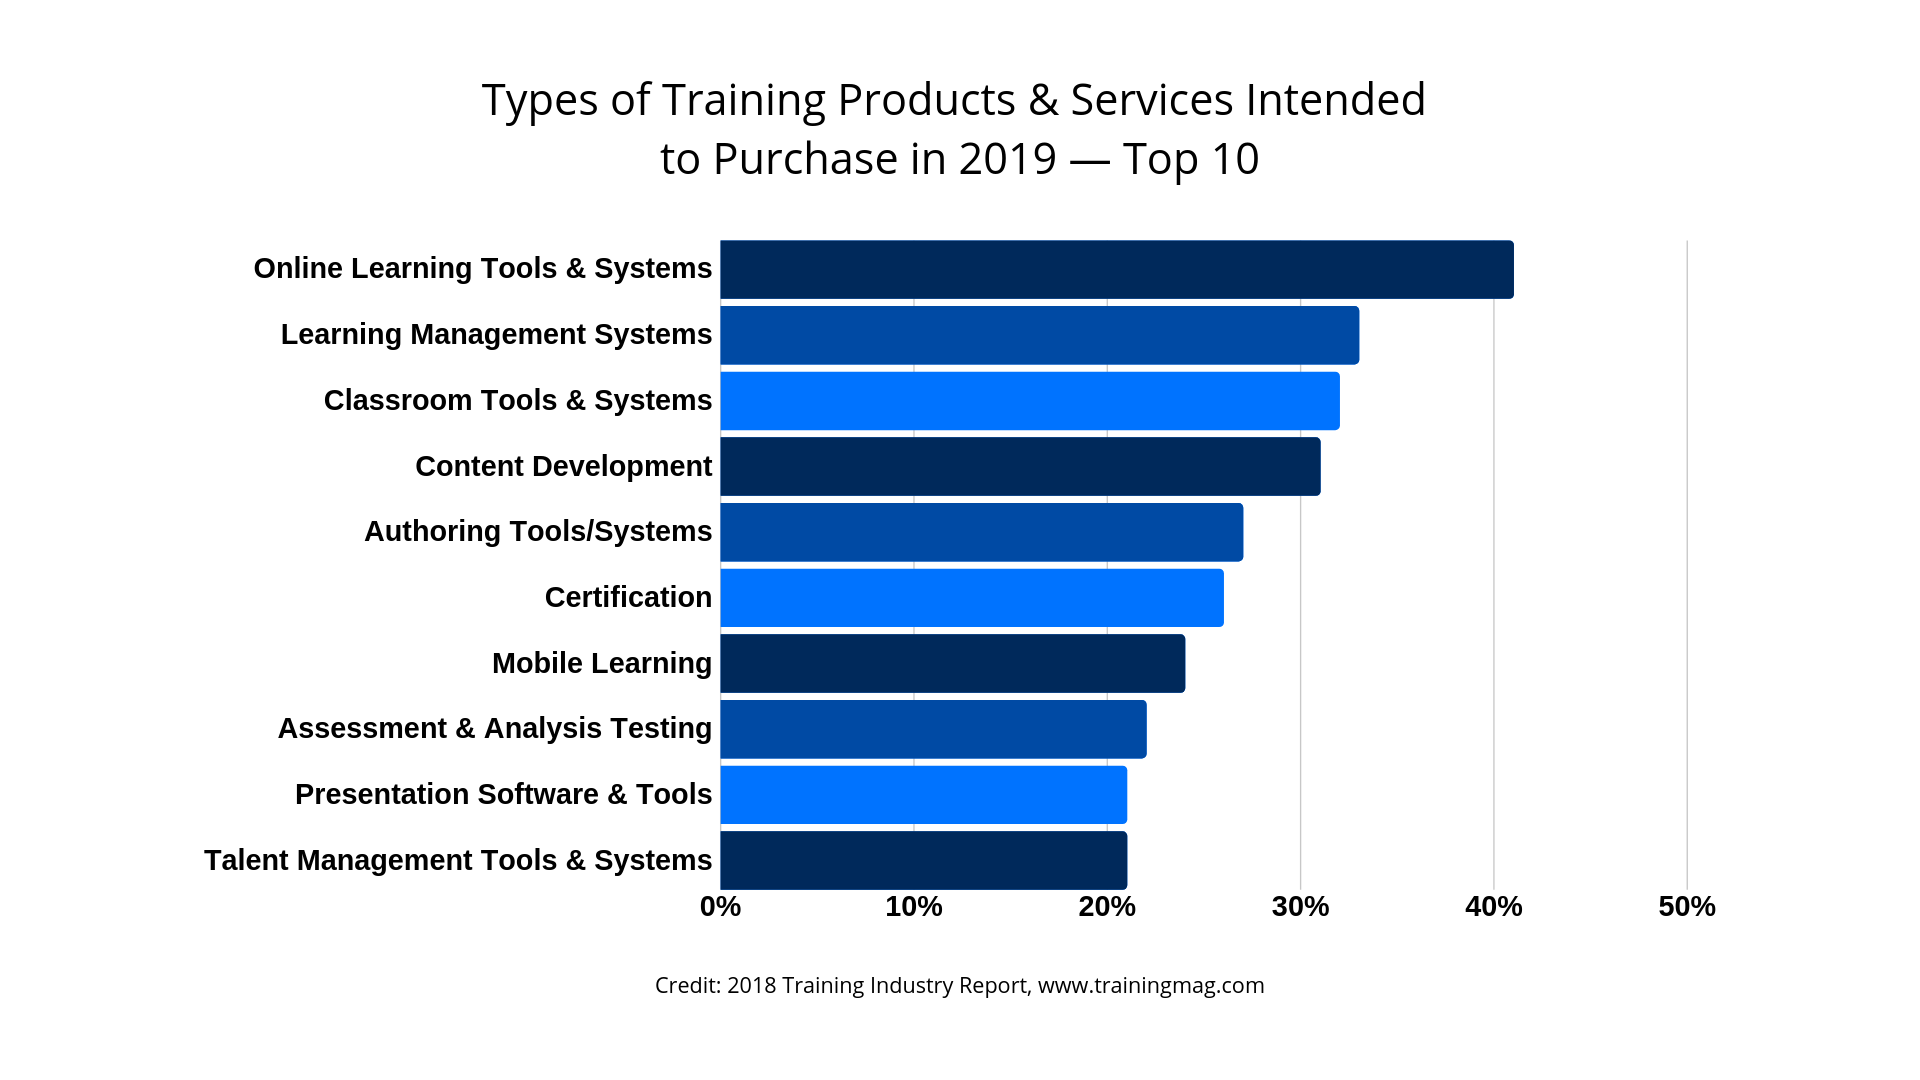 Why You Should Have a Training Budget for Online Learning